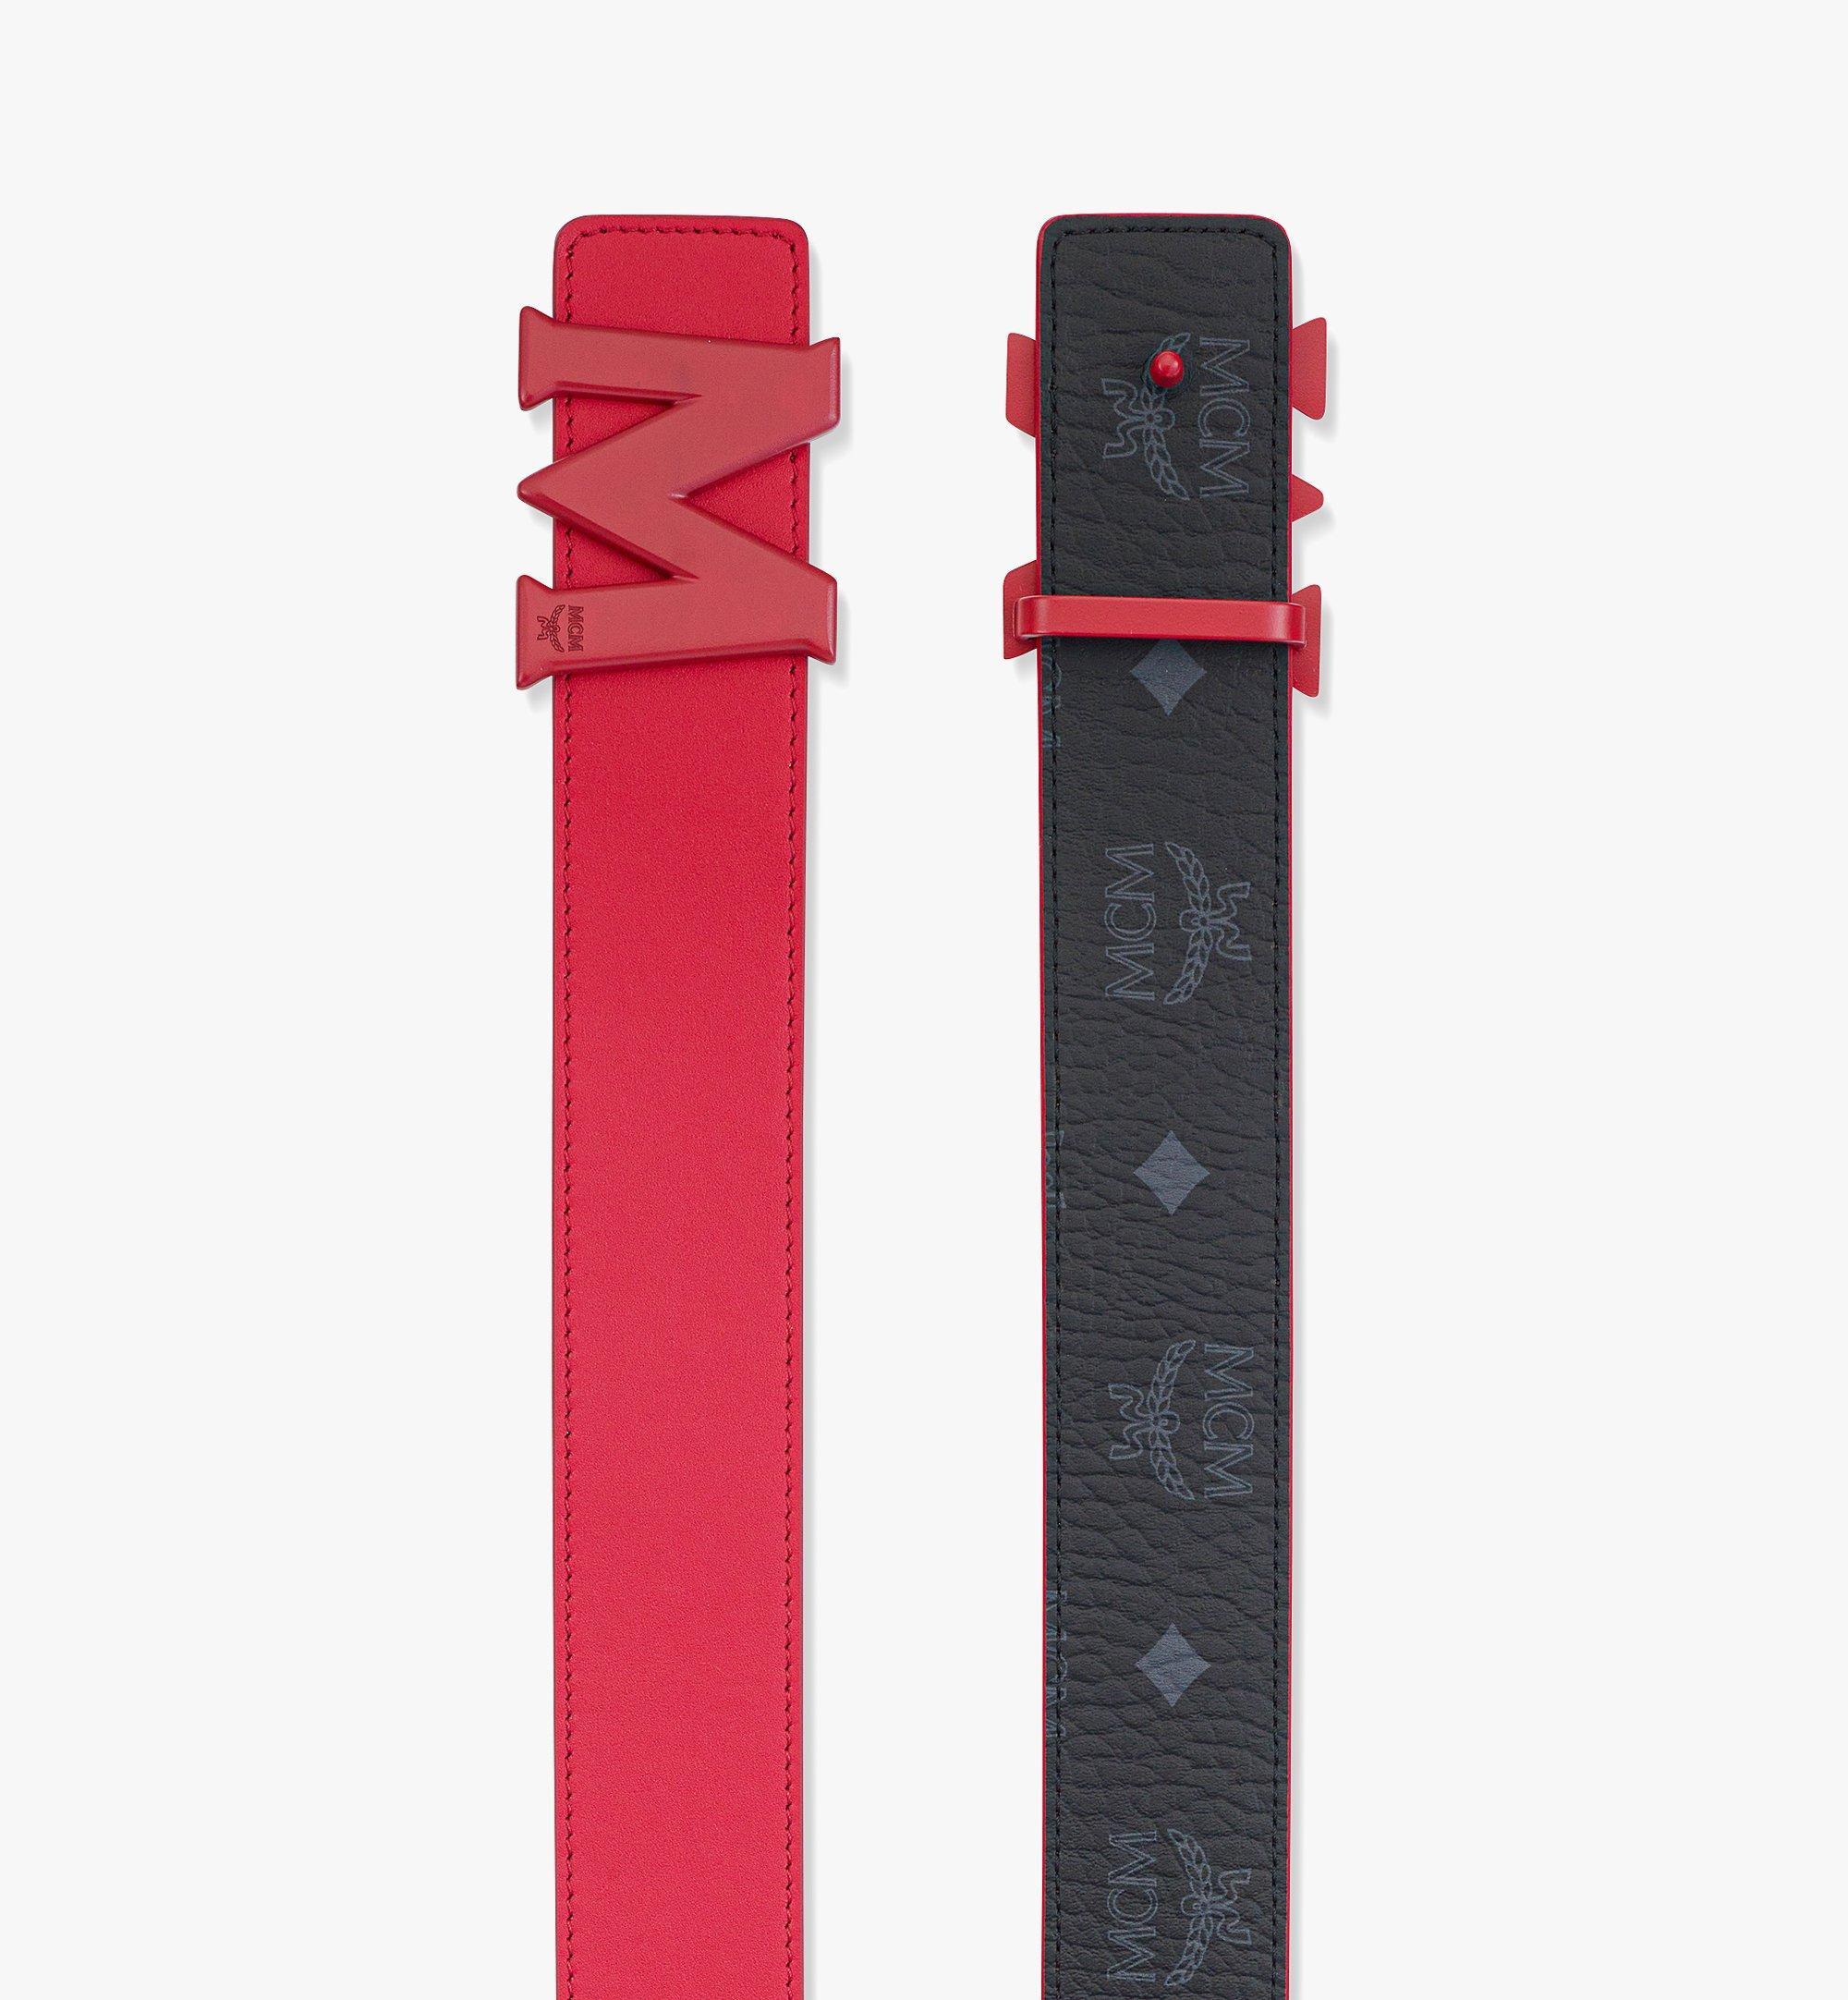 Authentic MCM Red and Black reversible belt with India